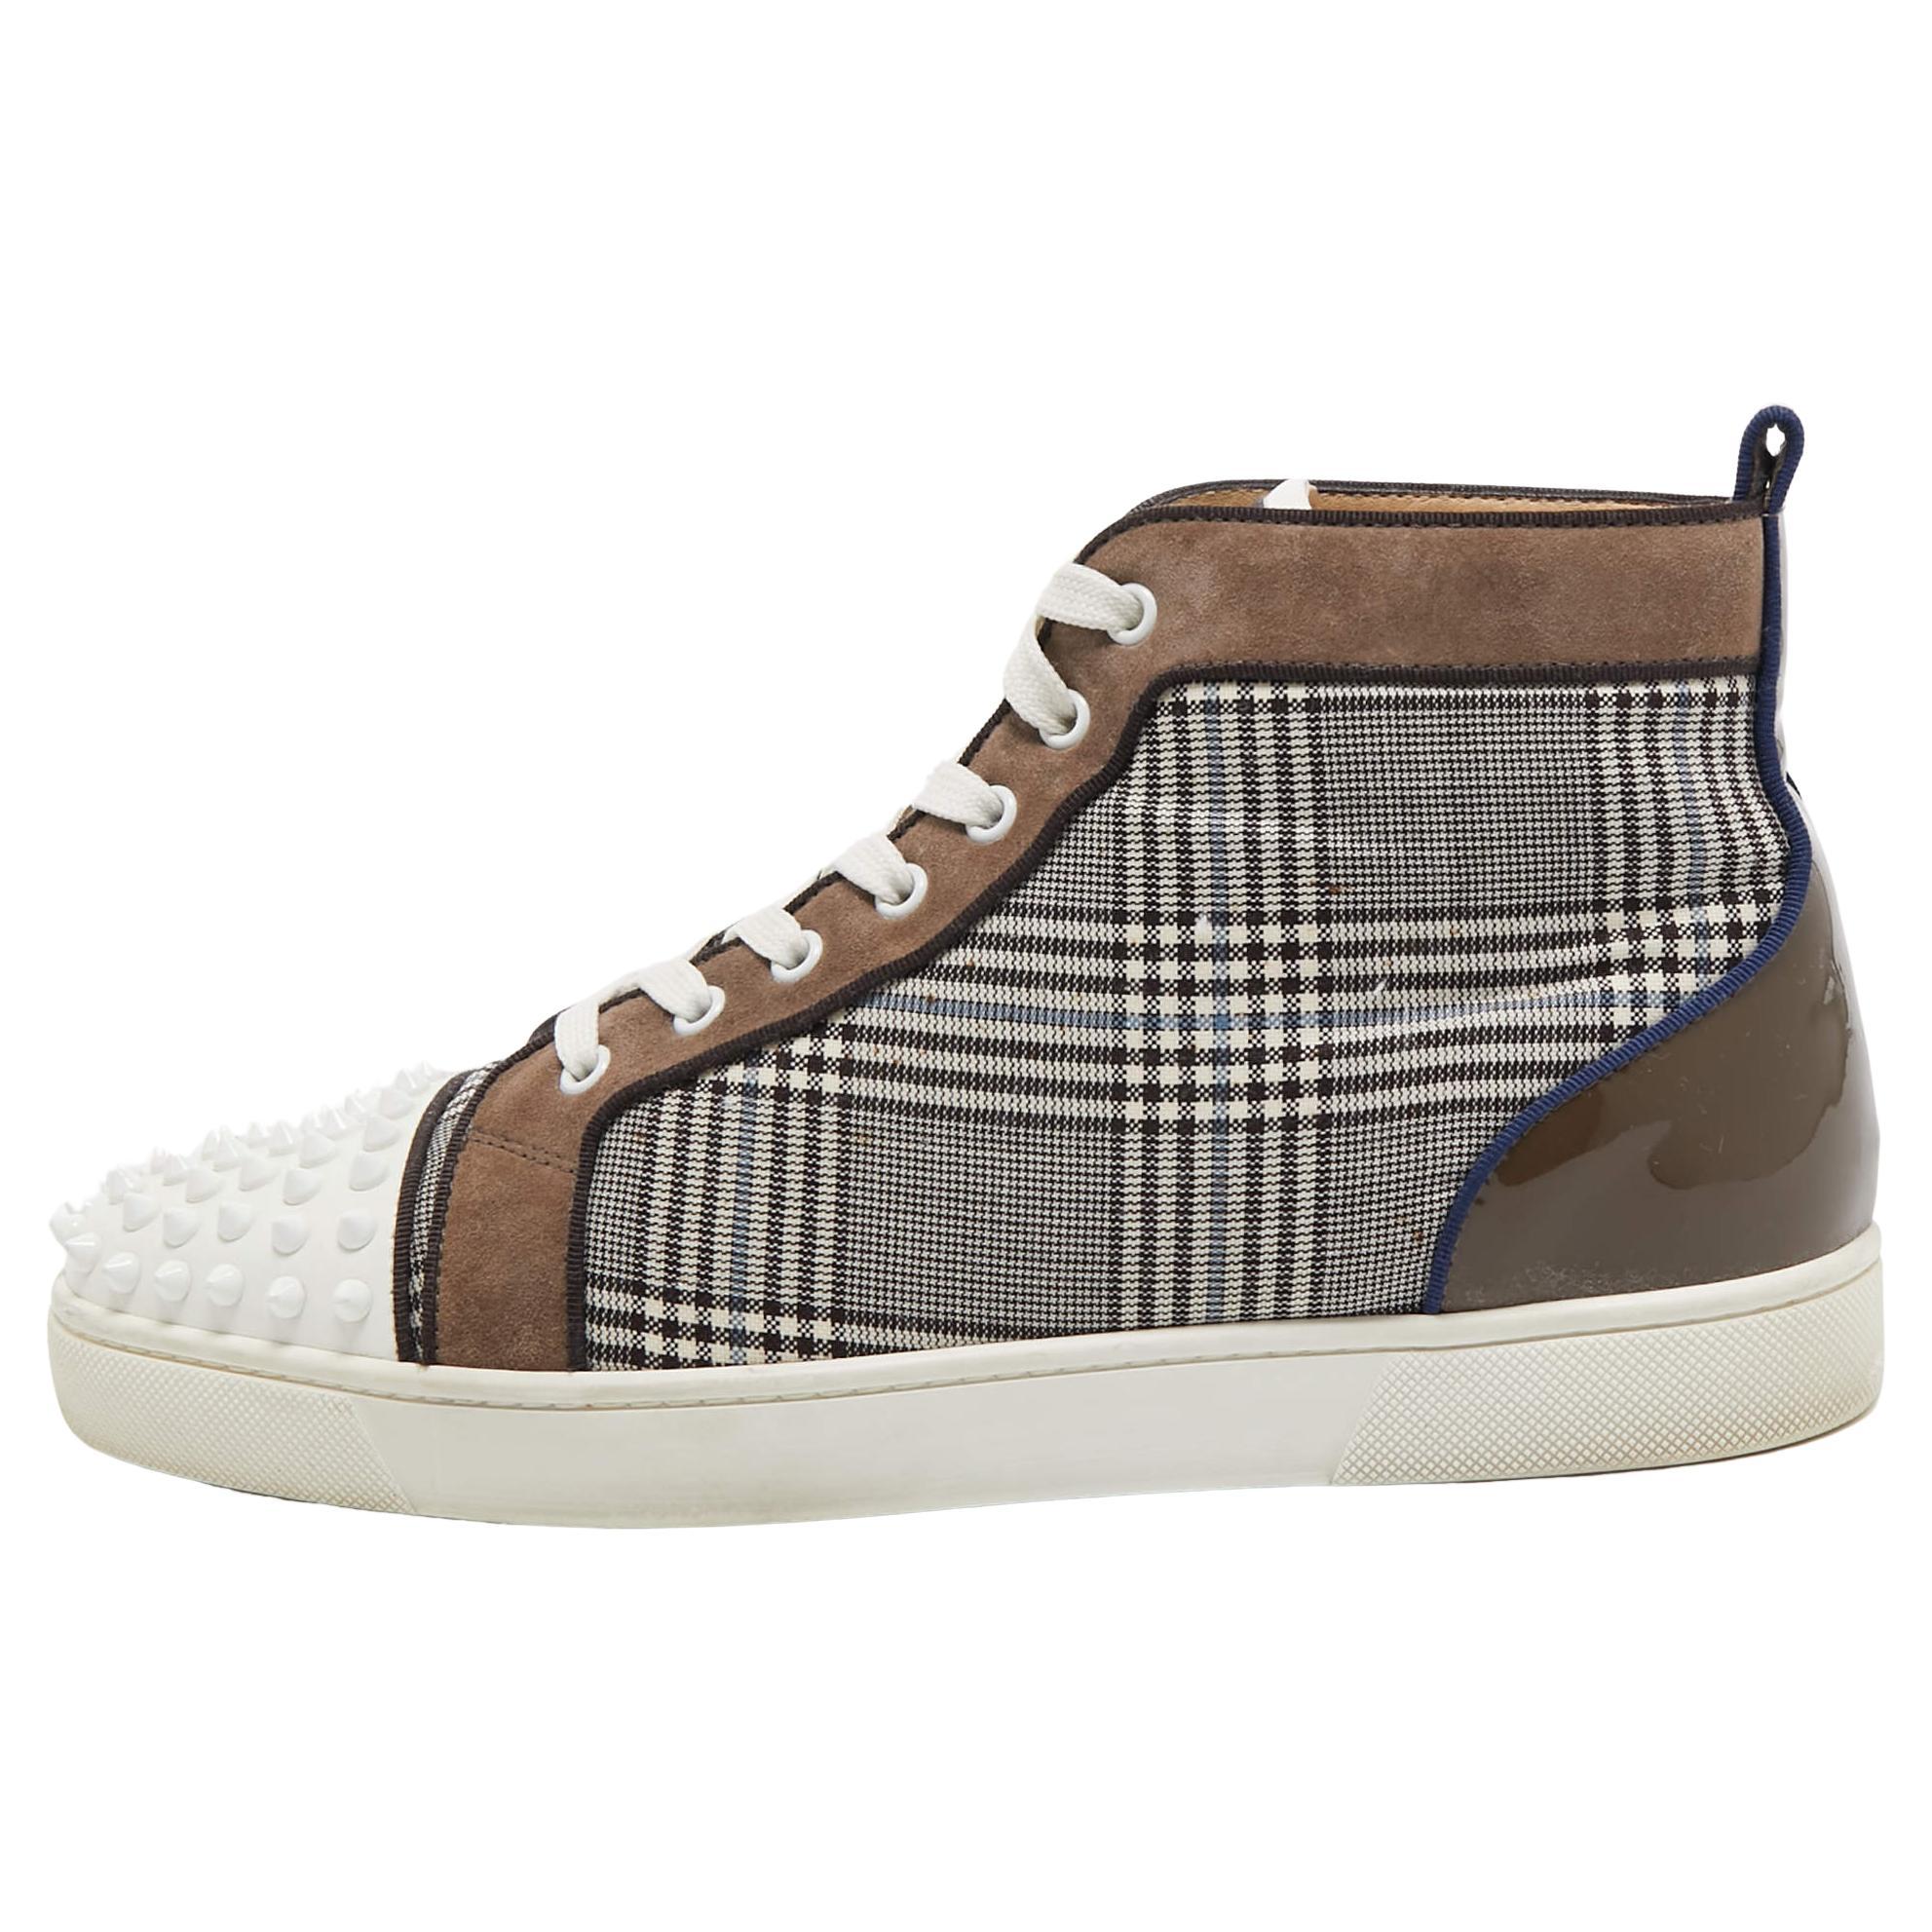 Christian Louboutin Multicolor Check Louis Spike High Top Sneakers Size 42.5 For Sale